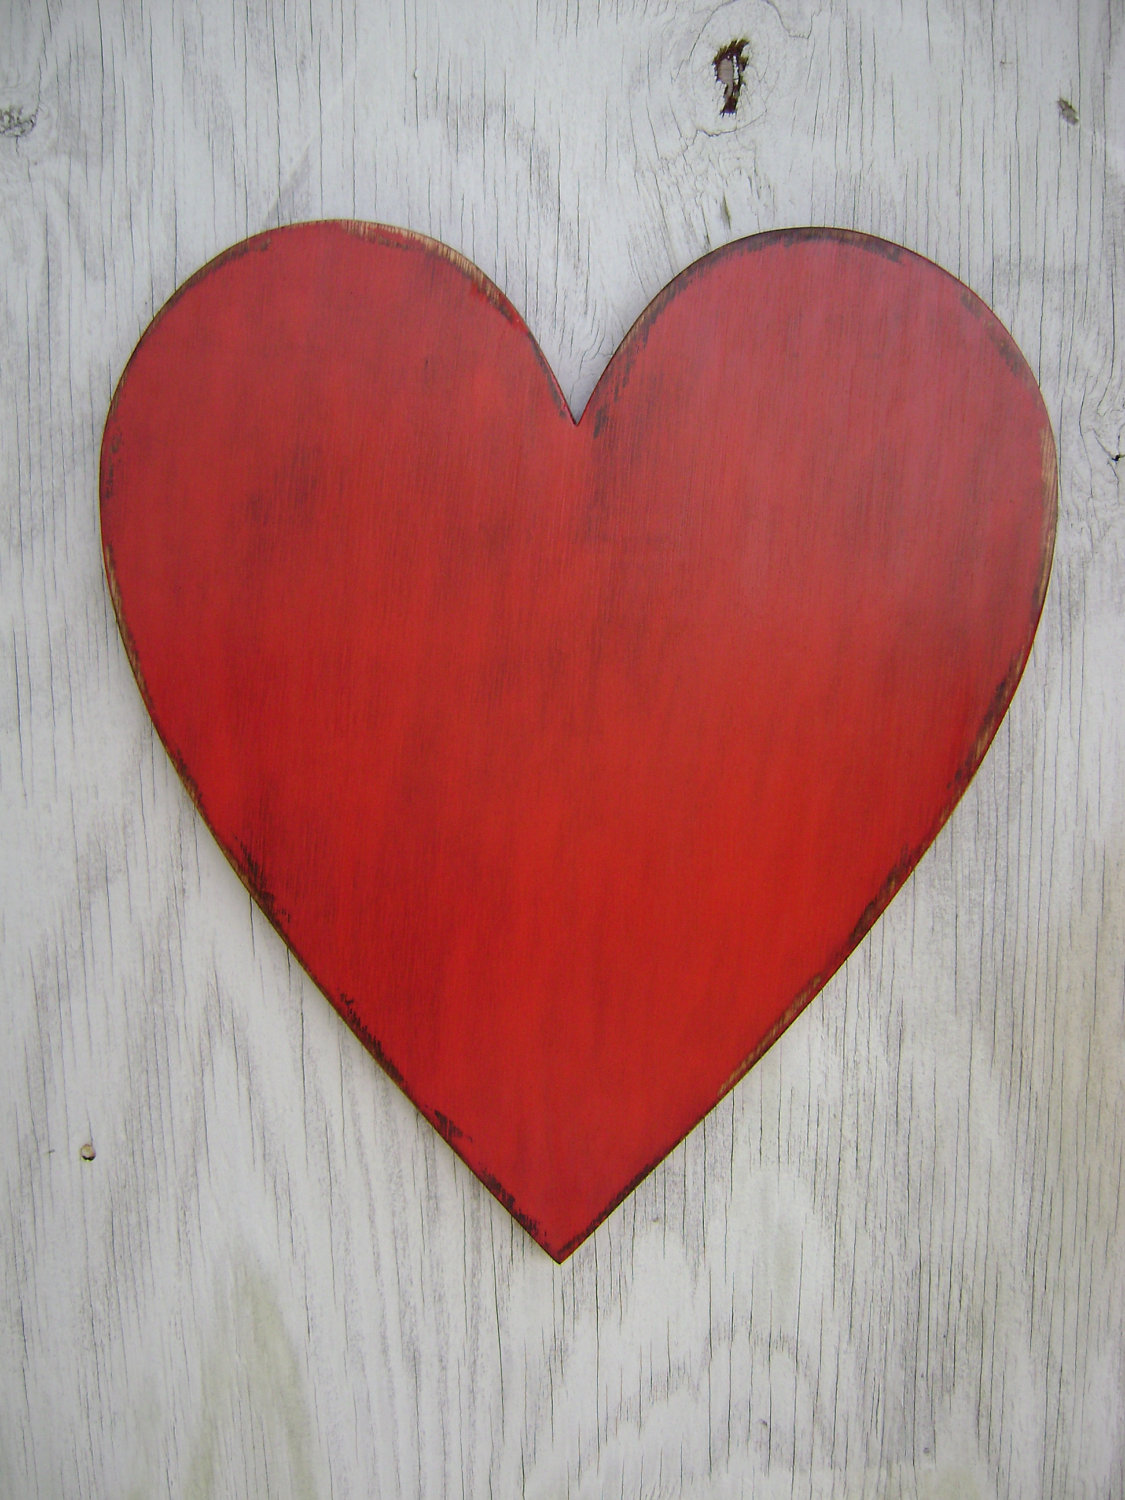 Wooden Heart Wallpapers High Quality | Download Free